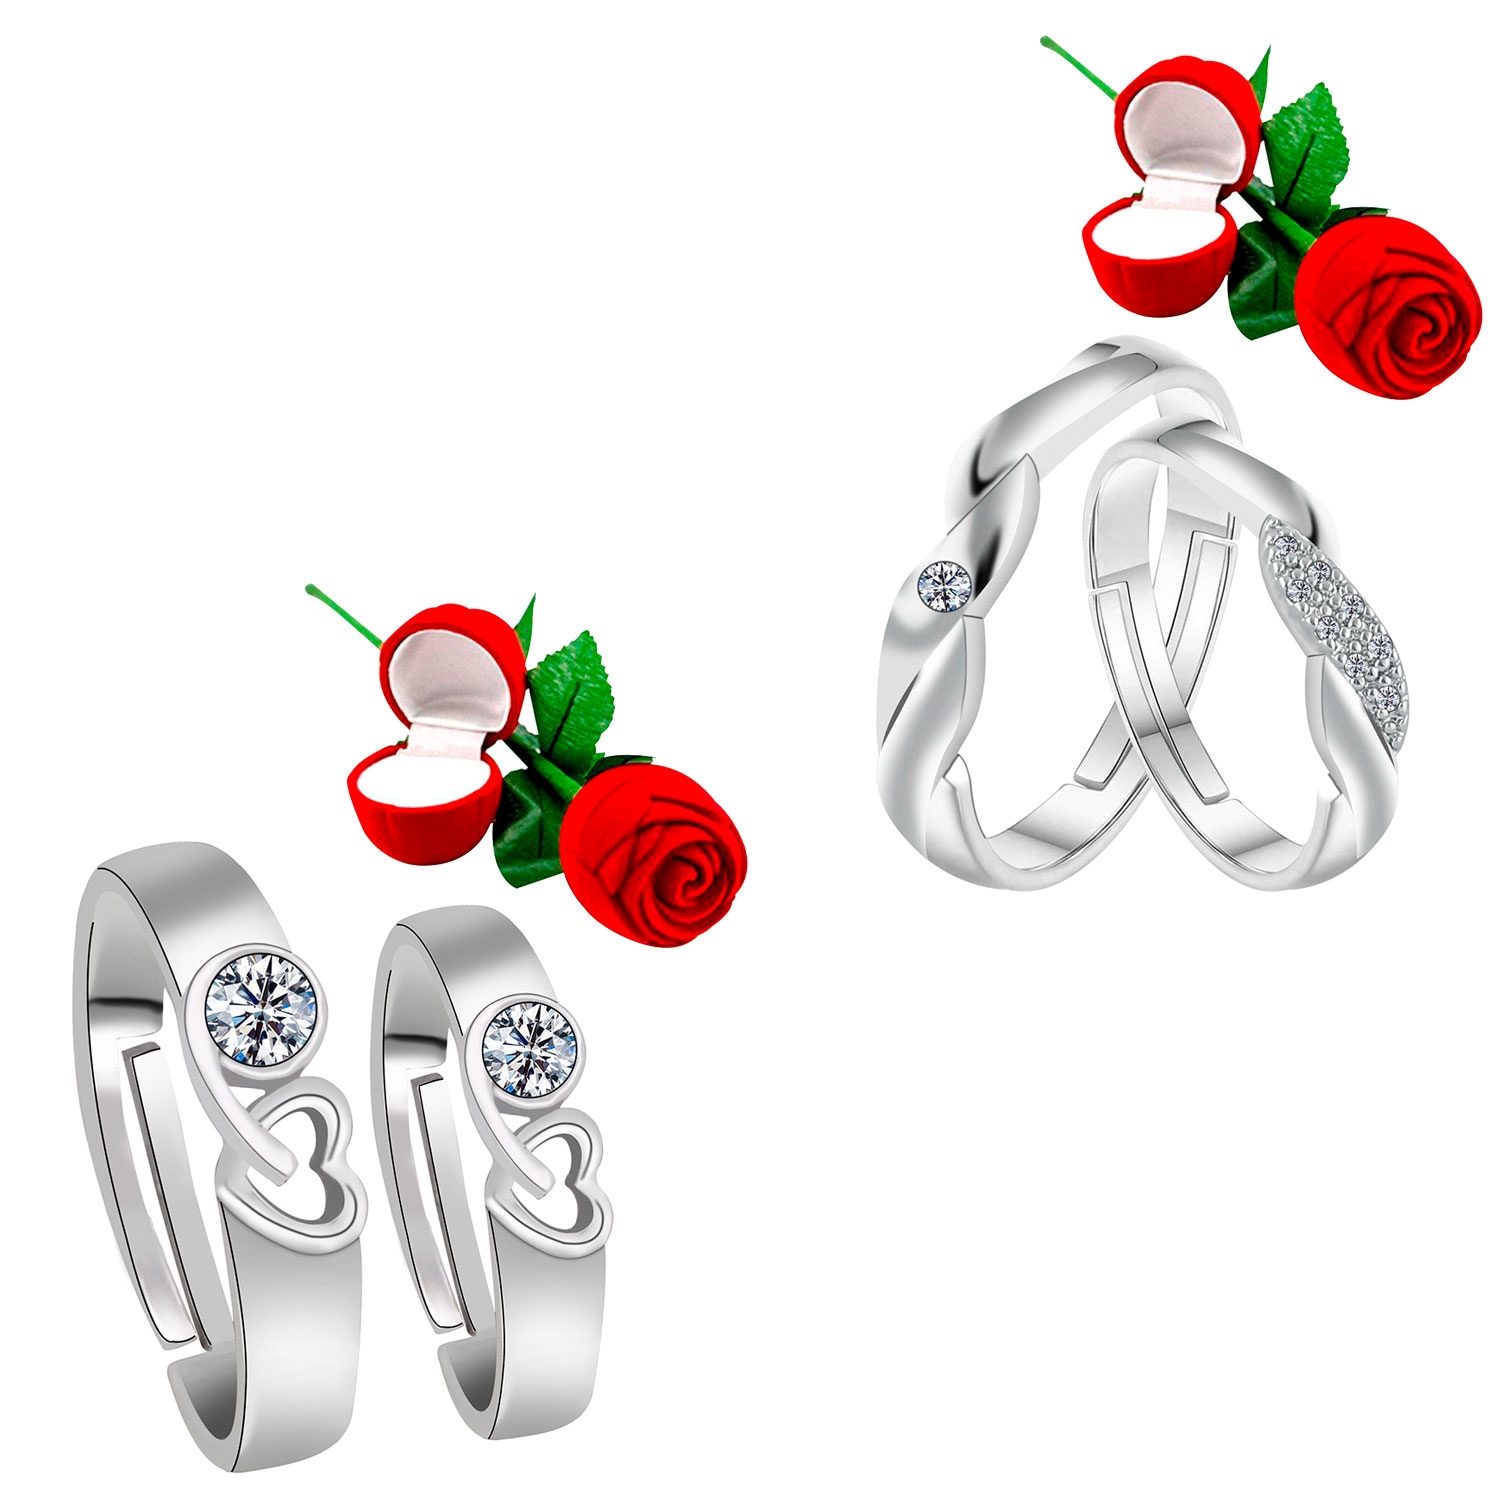 SILVER SHINE |  Adjustable Couple Rings Set for lovers with 2 Piece Red Rose Gift Box Silver Plated Designer Ring for Men and Women 